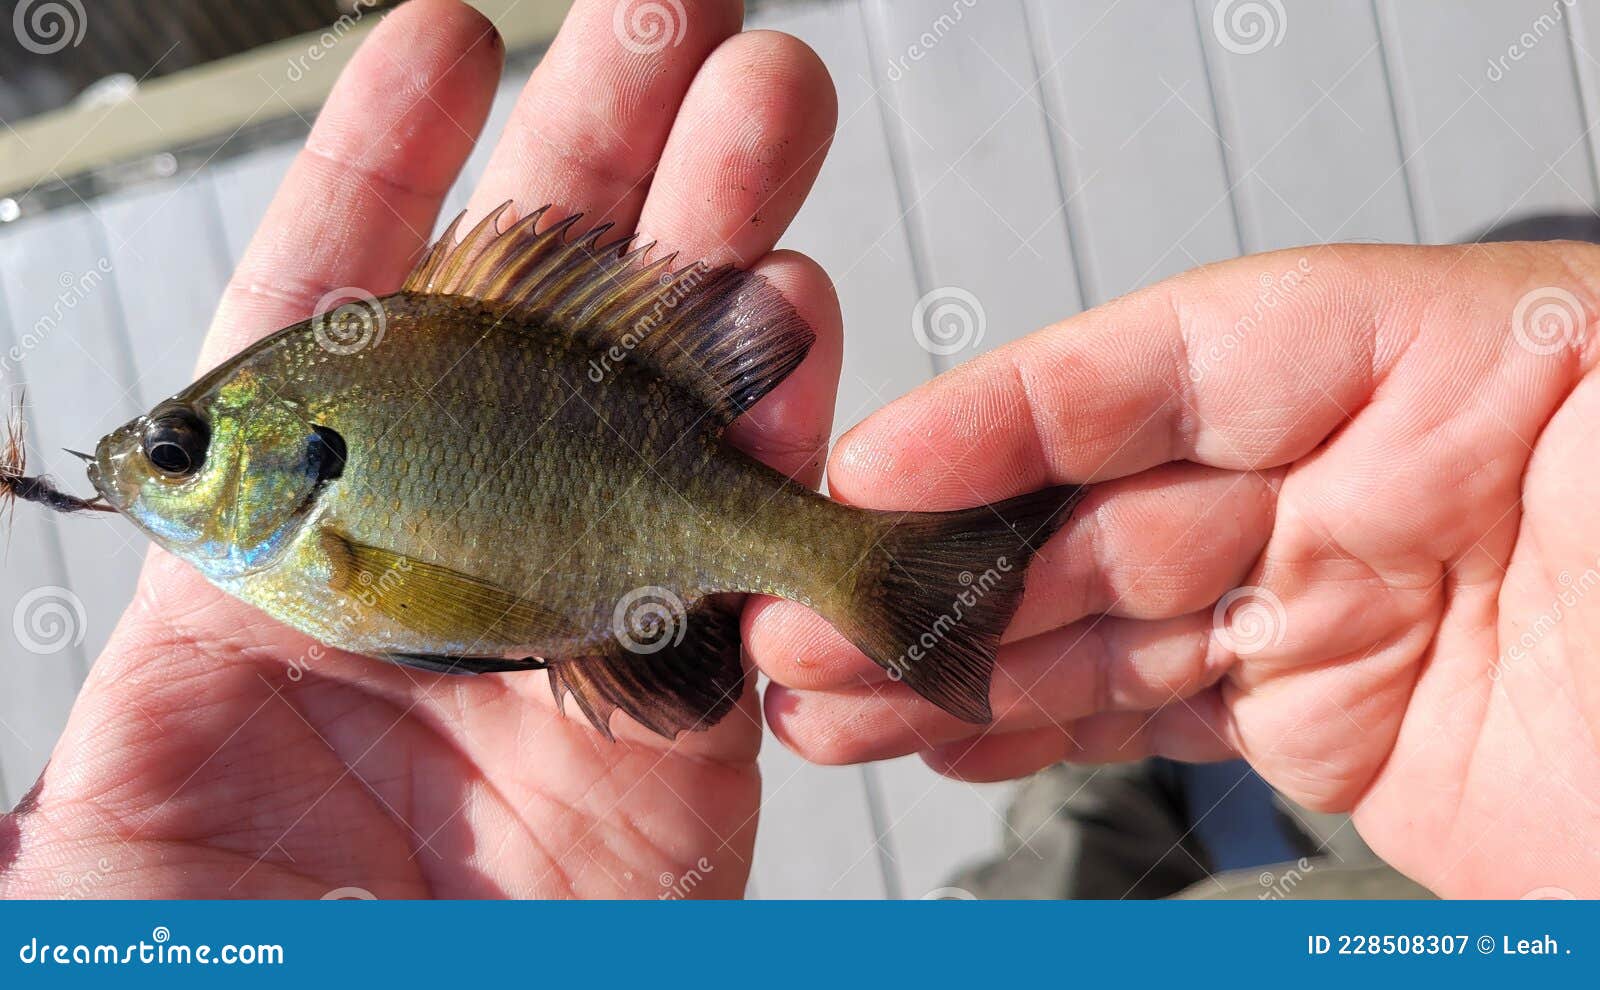 Fisherman Holds Small Bluegill Panfish Fish Caught on Fishing Fly Hook at a  Dock Stock Image - Image of holds, dish: 228508307